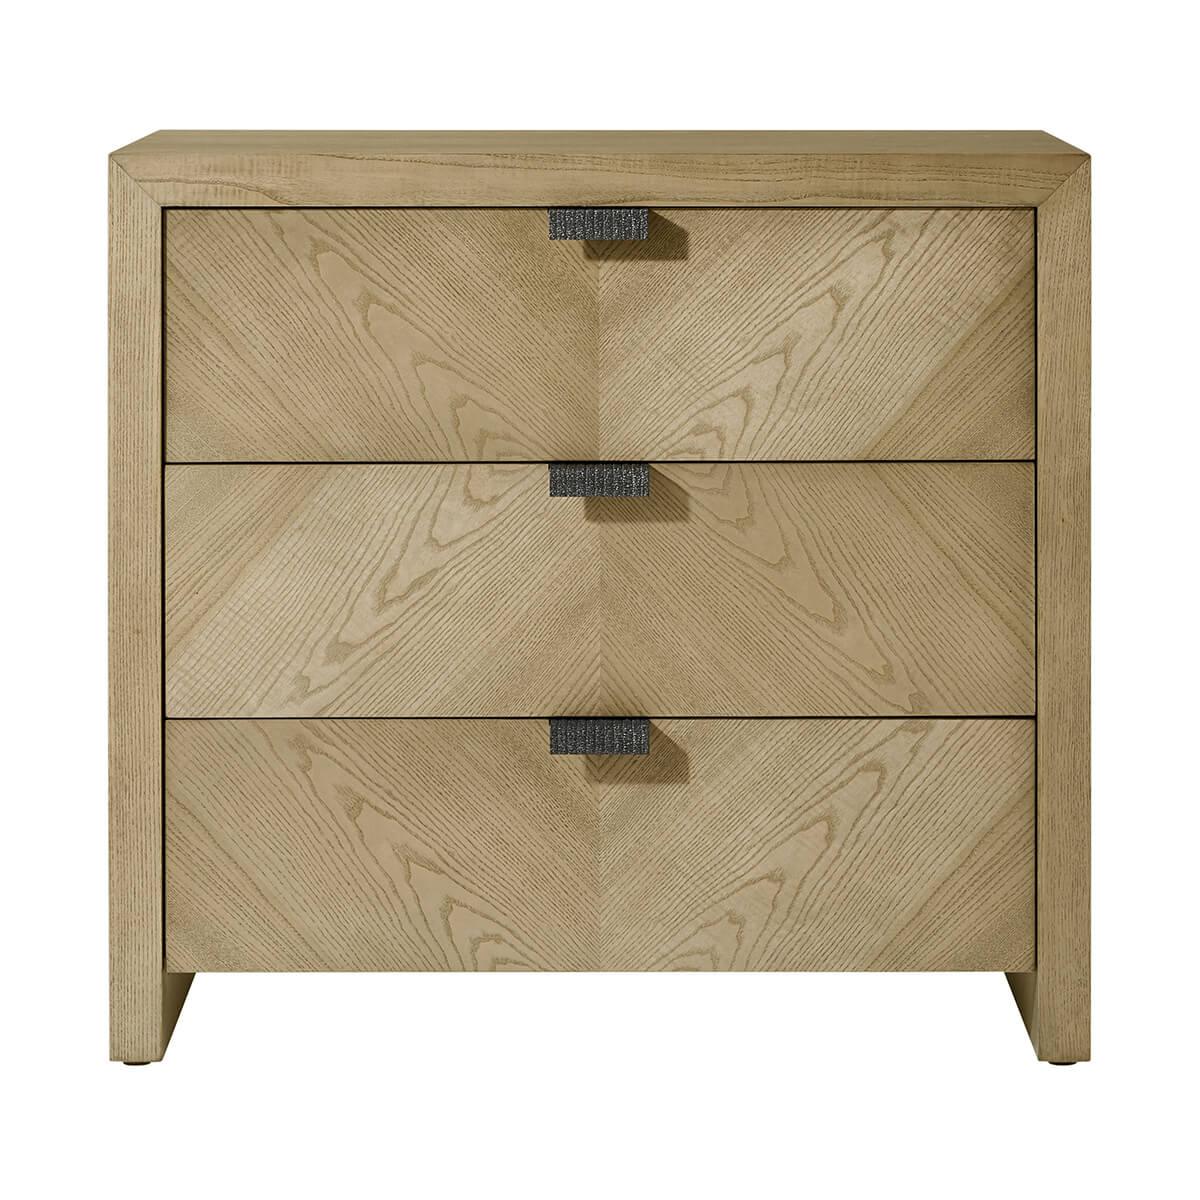 three drawer nightstand made of figured cathedral ash in artful grain patterns of our light dune finish with textured metal pulls in our Ember finish and soft close drawers.

Dimensions: 32